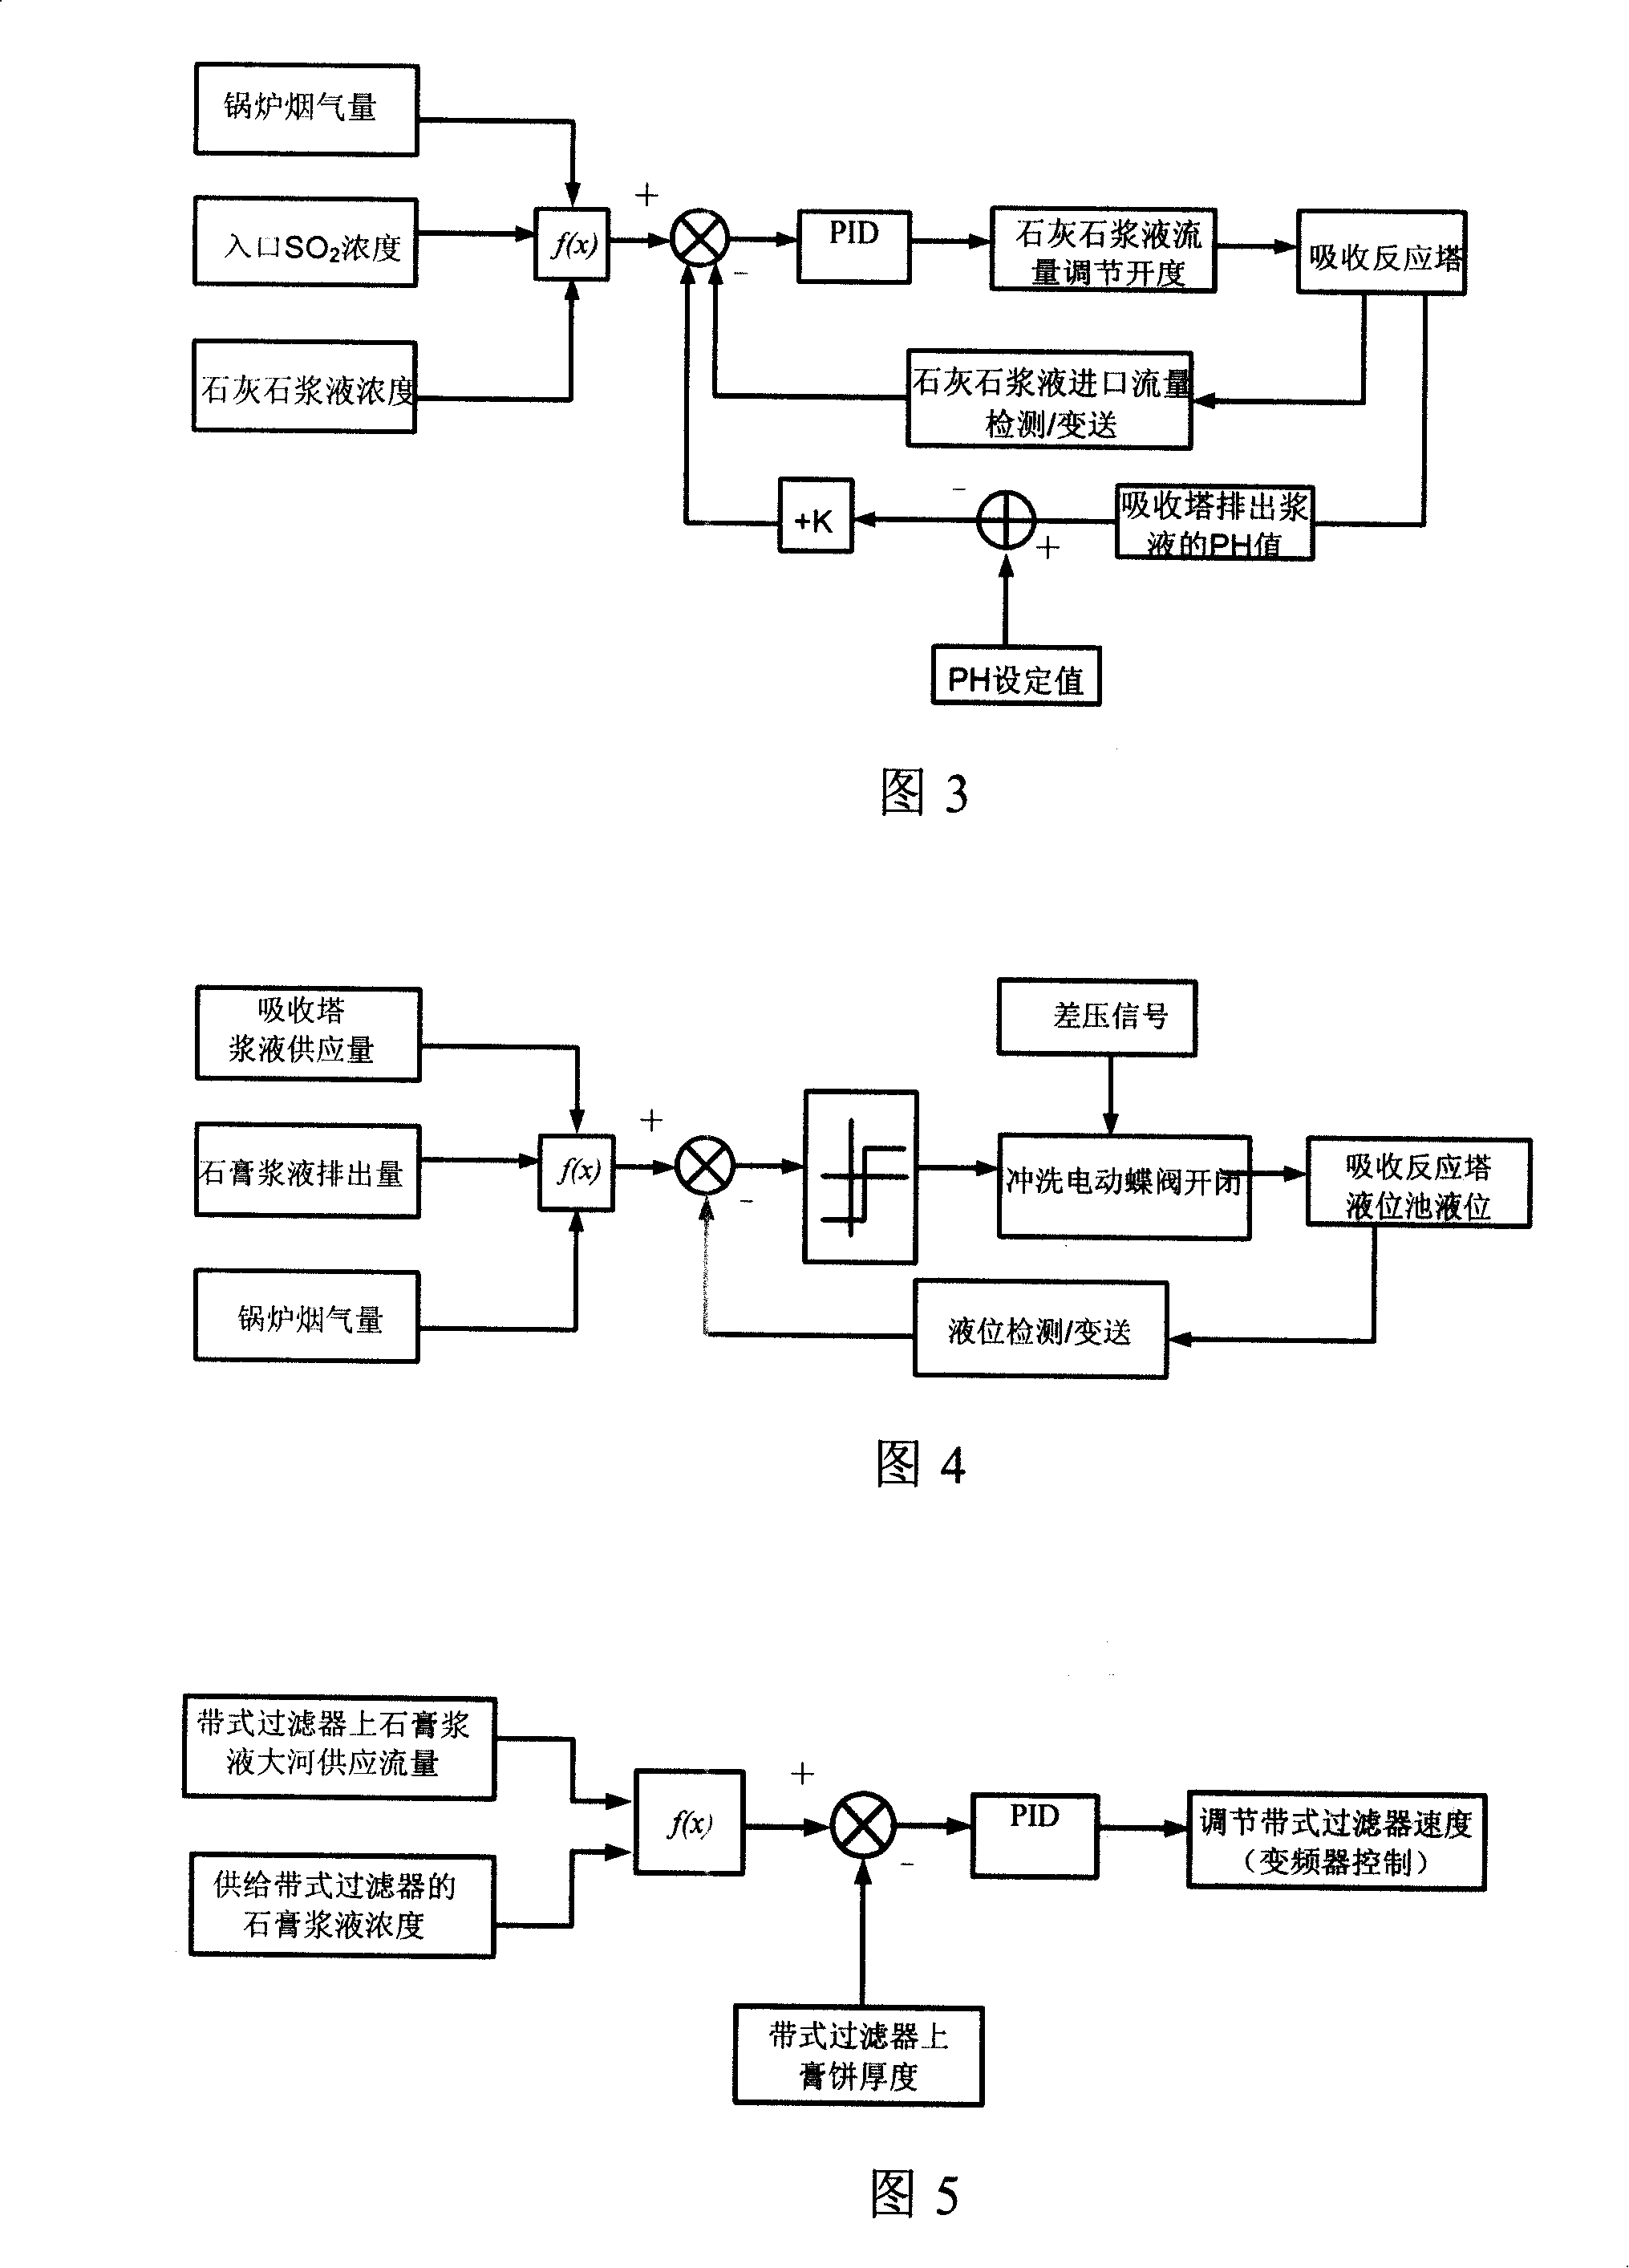 Flue gas desulfurization control system of large coal-fired power plant